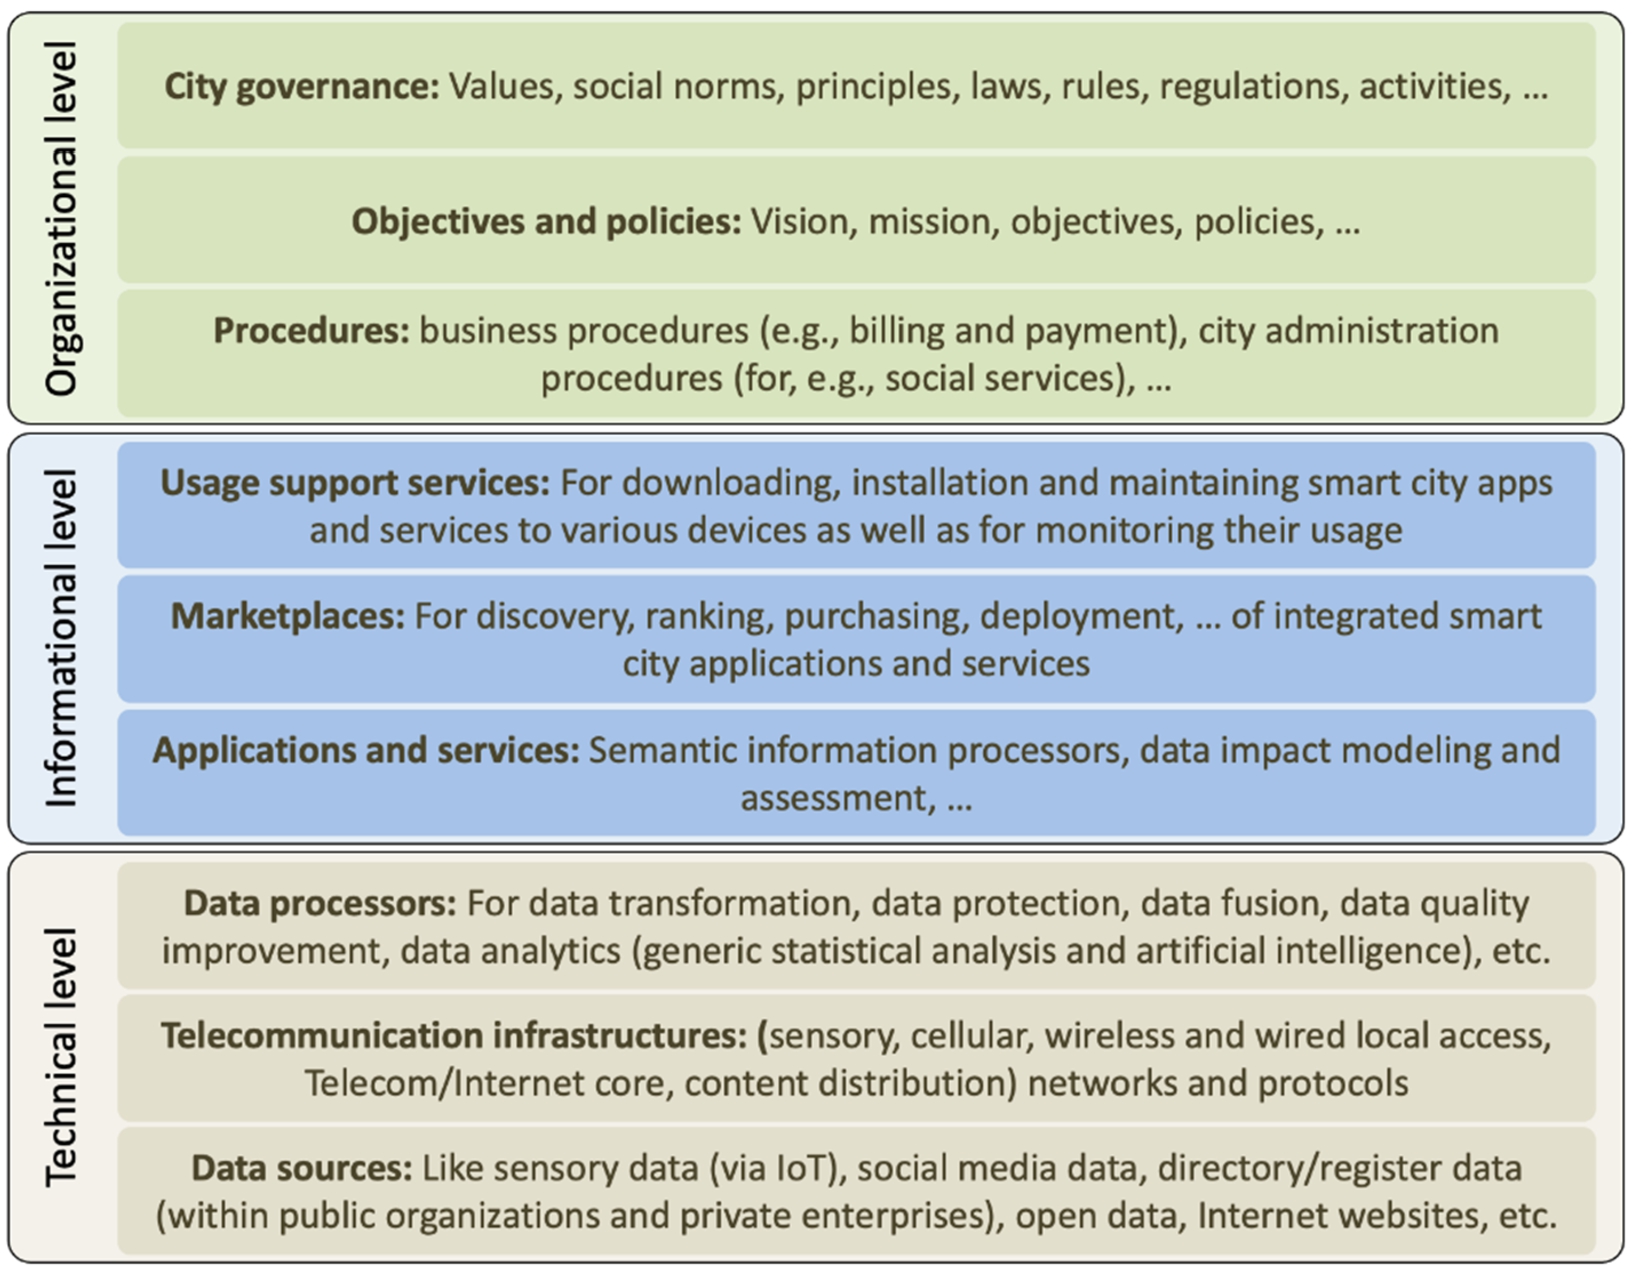 A reference model for smart cities, adopted with adaption from [46].